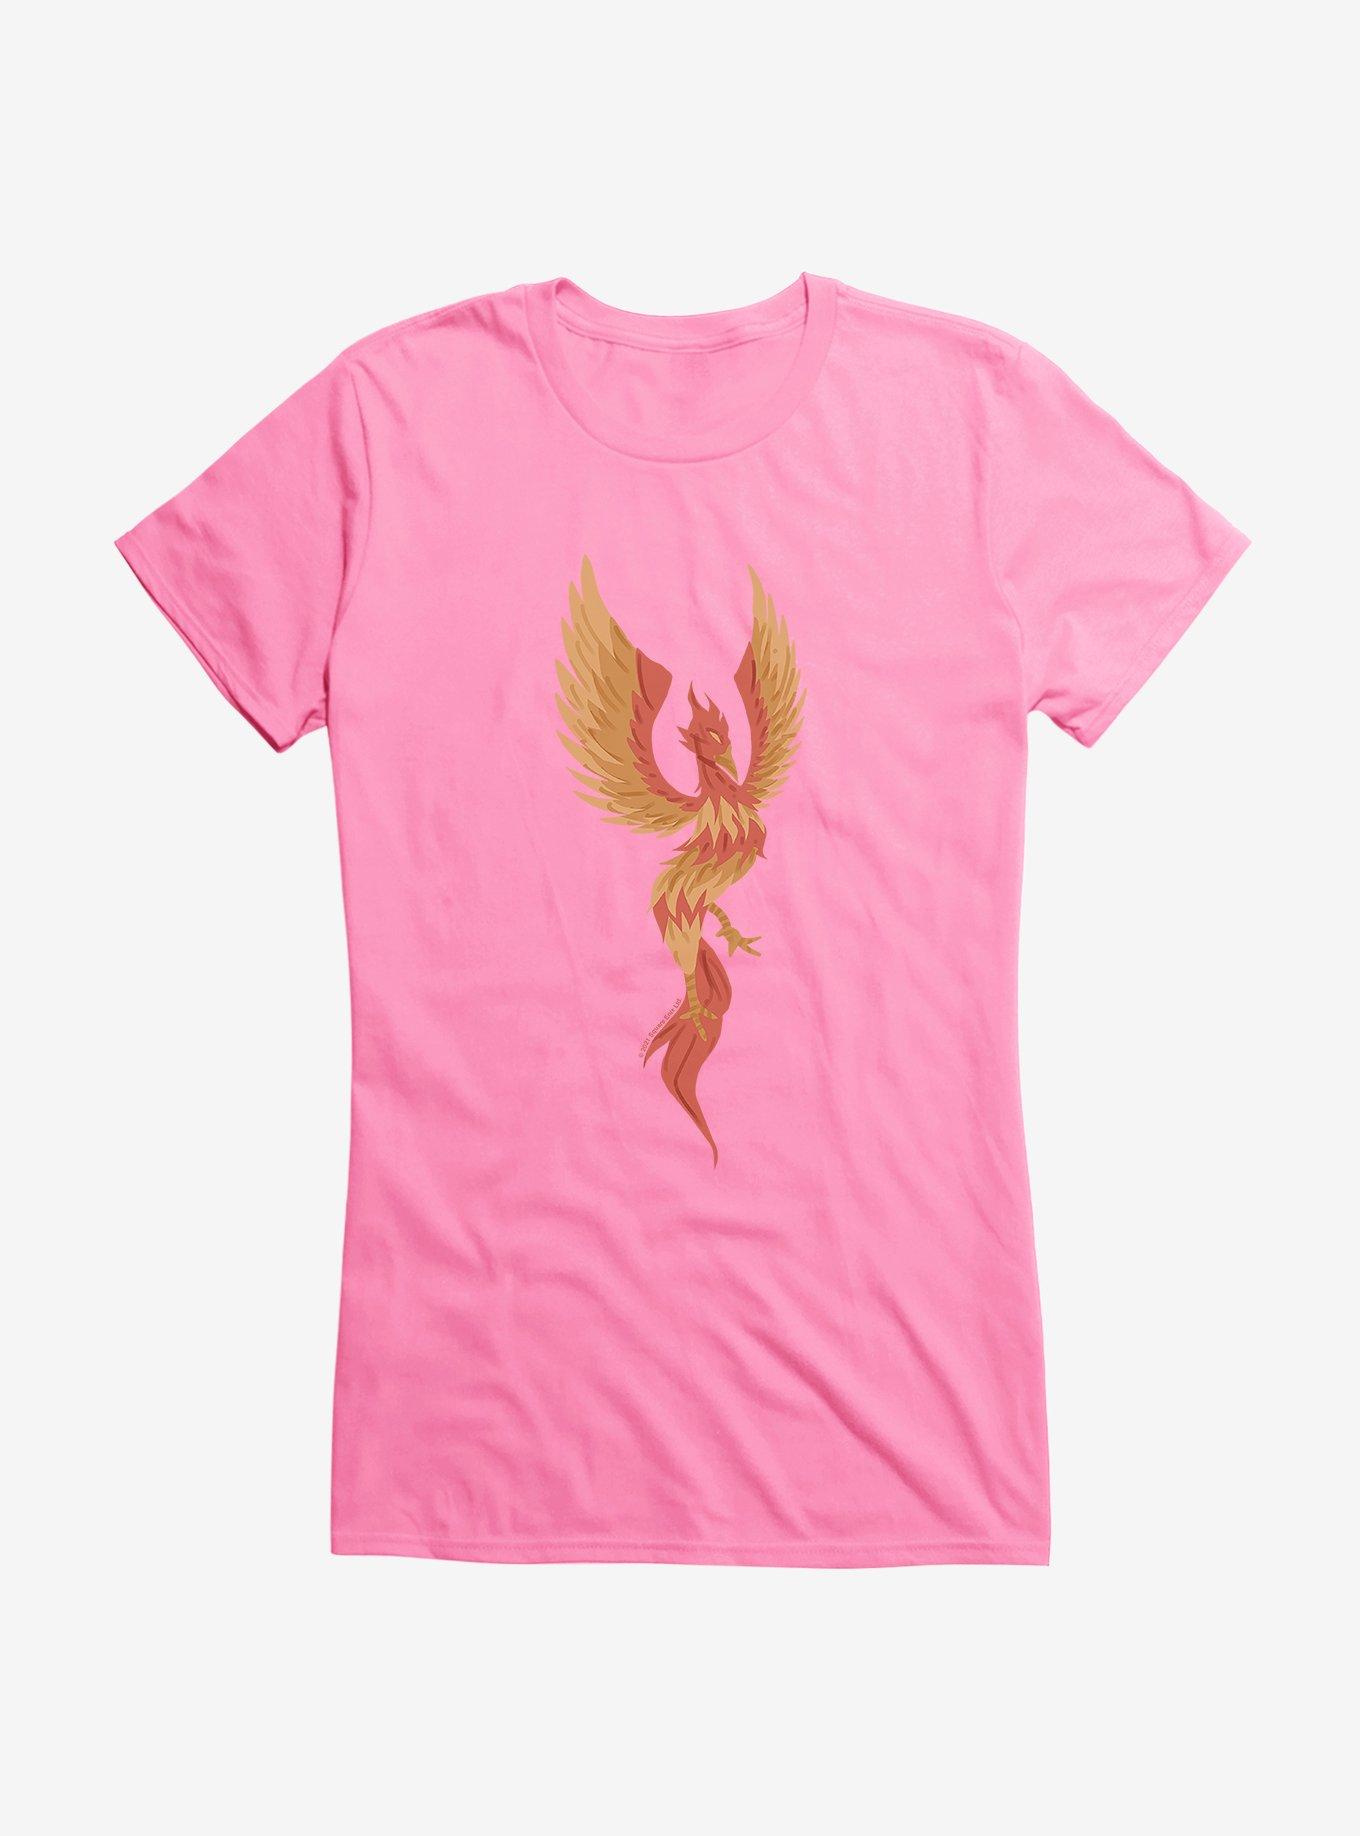 Square Enix Wings Girls T-Shirt, CHARITY PINK, hi-res